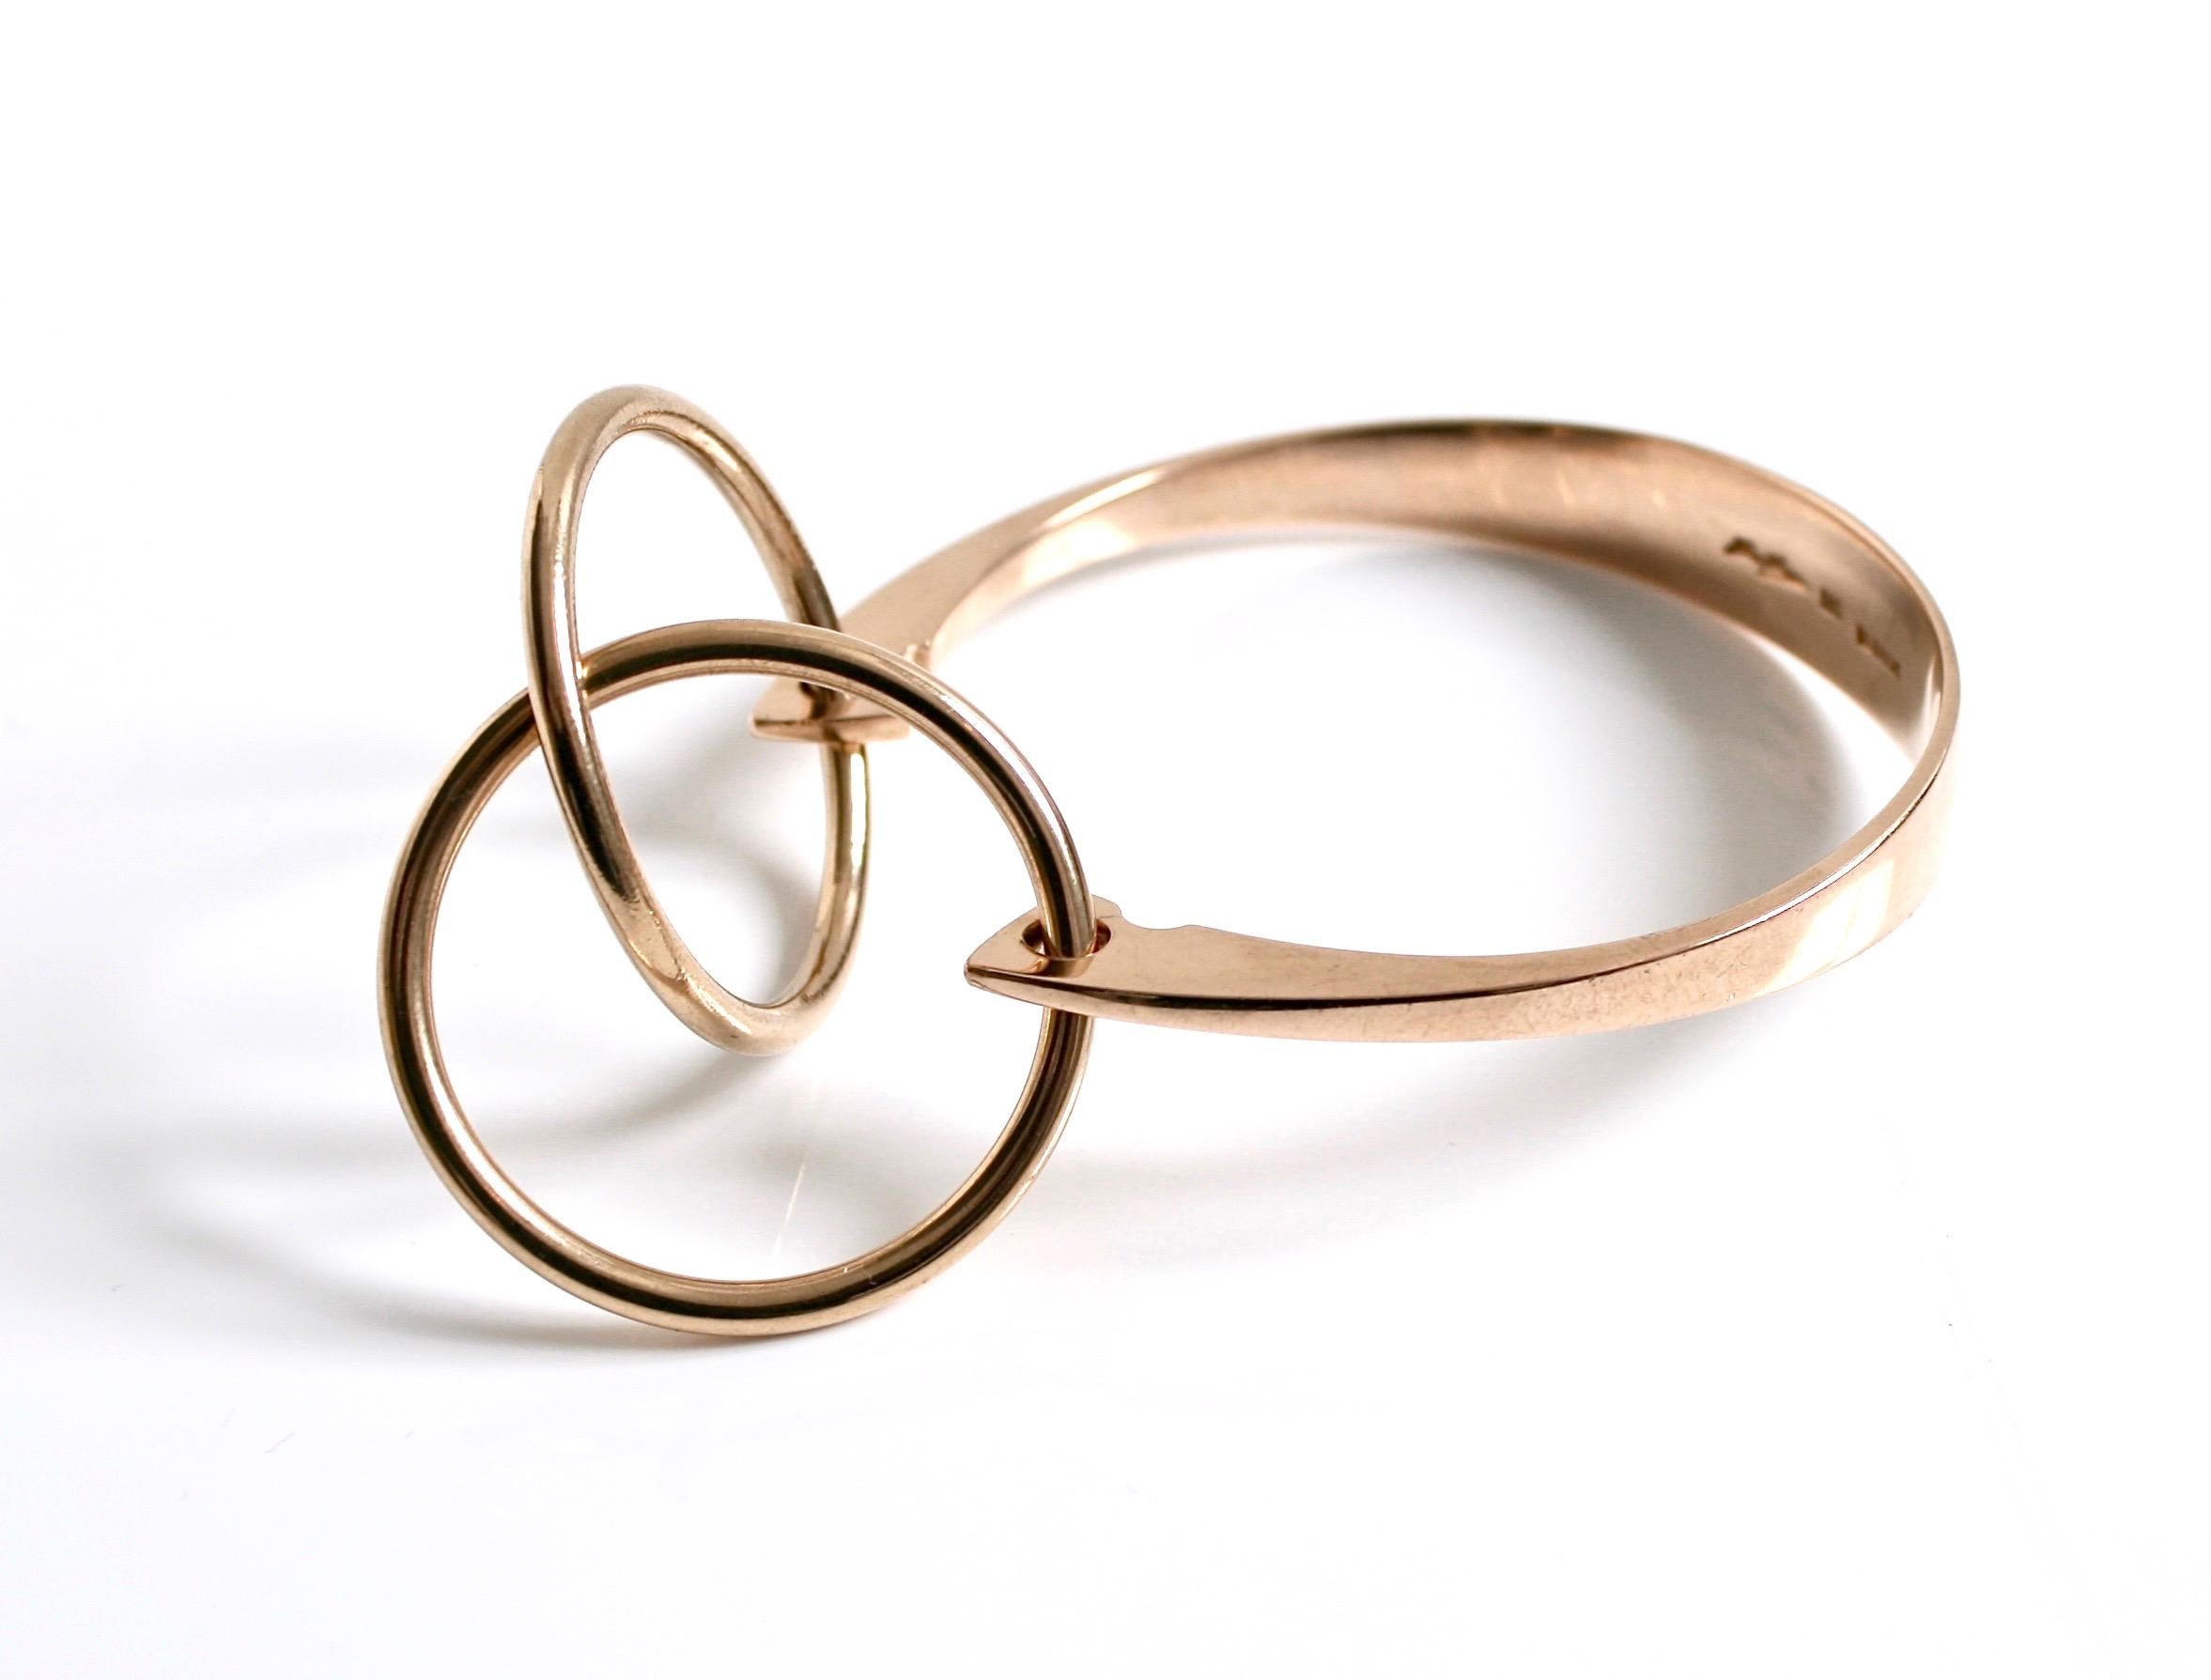 Rare 14k rose gold bangle designed by Bent Gabrielsen c.1970 for Hans Hansen Denmark 
Double ring on the front of the bangle

Bent Gabrielsen Pedersen (born in 1928) studied at the Danish College of Jewellery
and Silversmithing which produced all